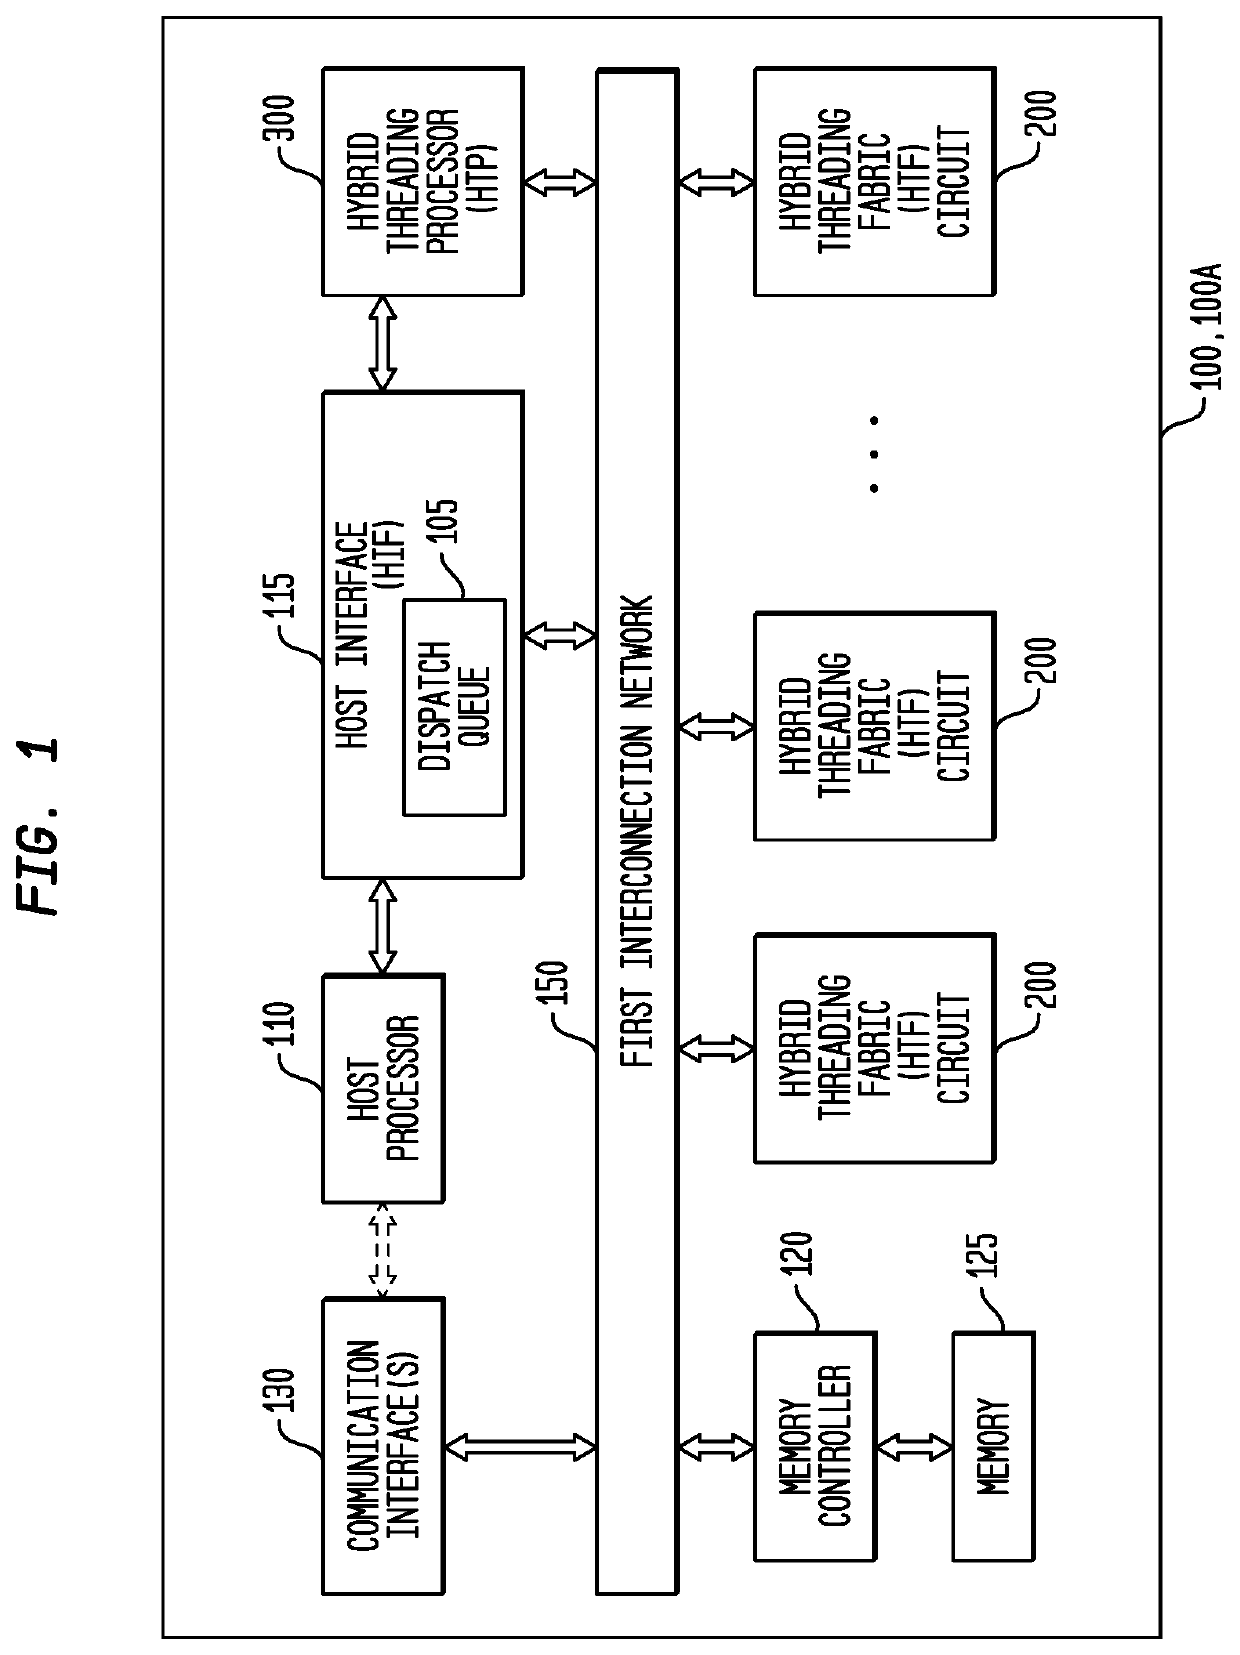 Memory Request Size Management in a Multi-Threaded, Self-Scheduling Processor